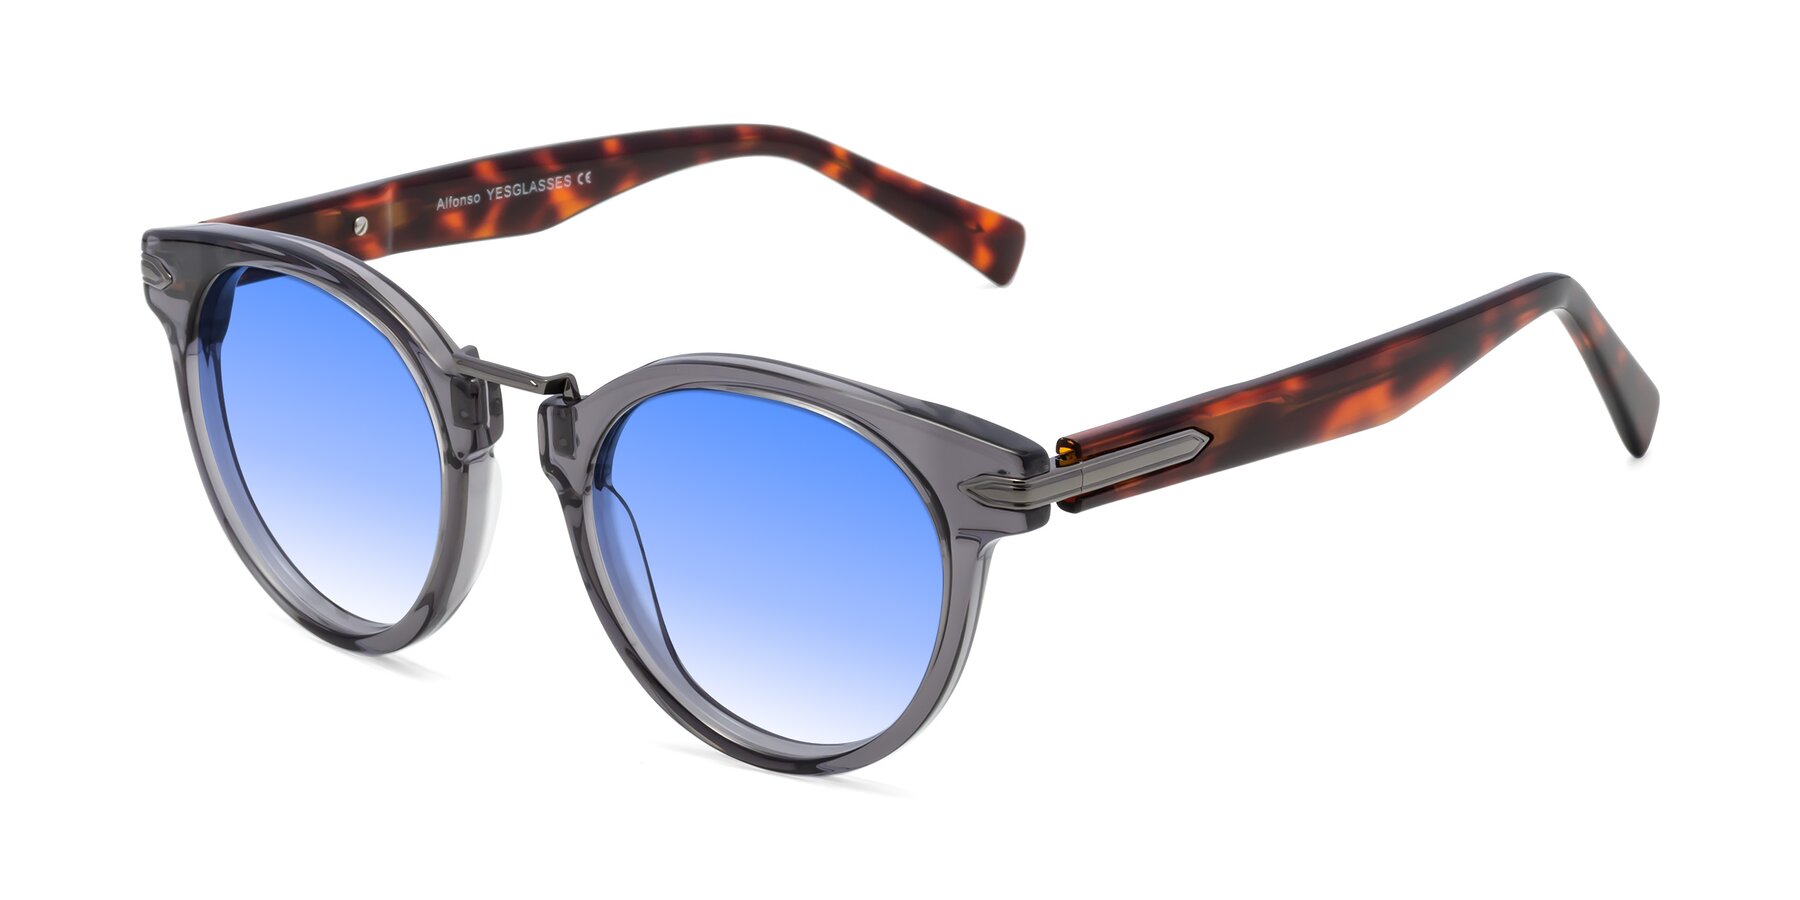 Angle of Alfonso in Gray /Tortoise with Blue Gradient Lenses